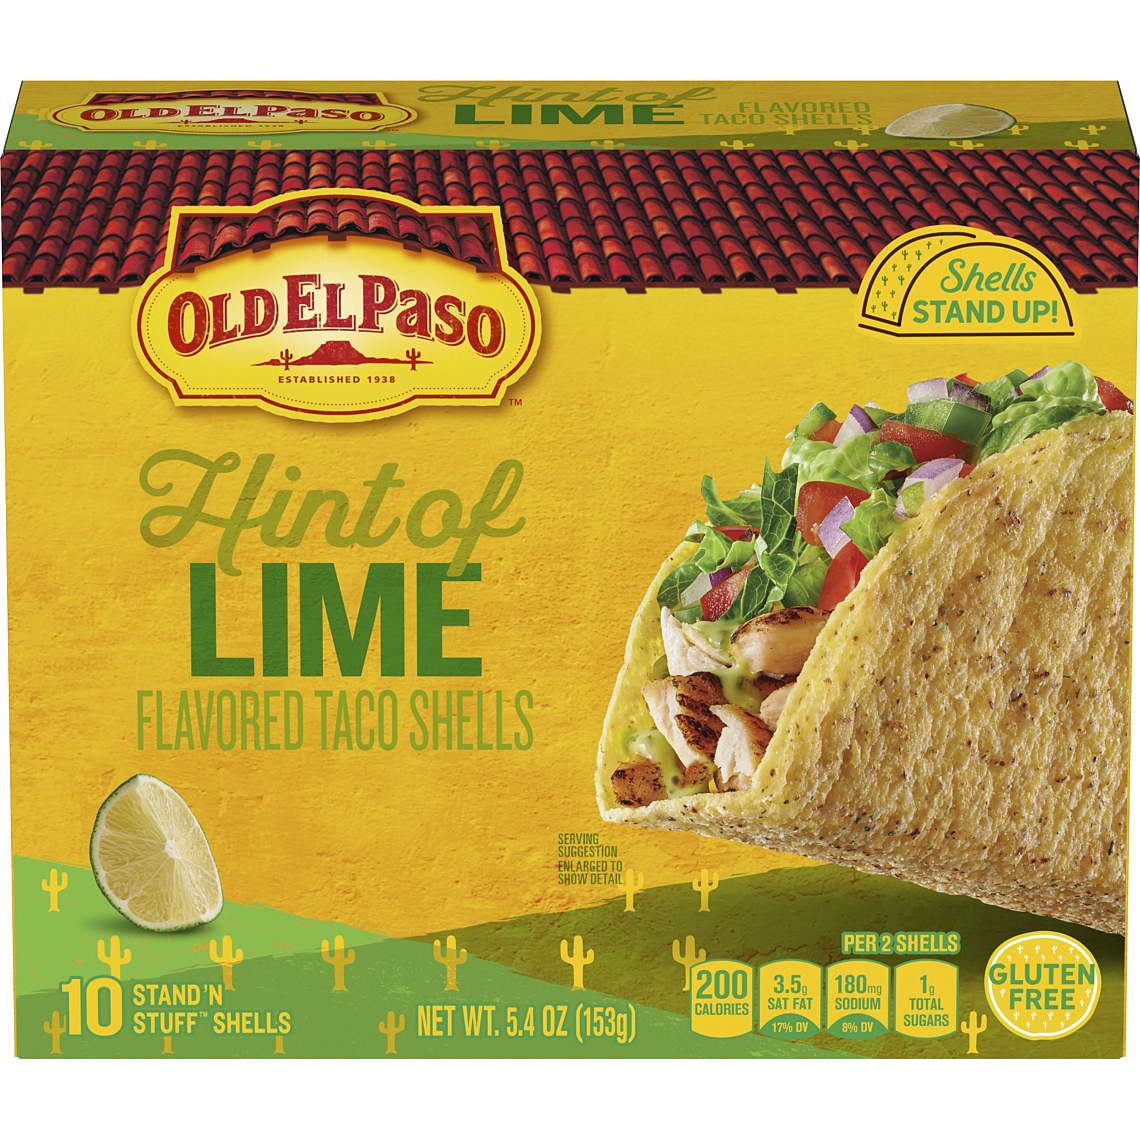 Stand 'N Stuff Taco Shells - Hint of Lime - Old El Paso